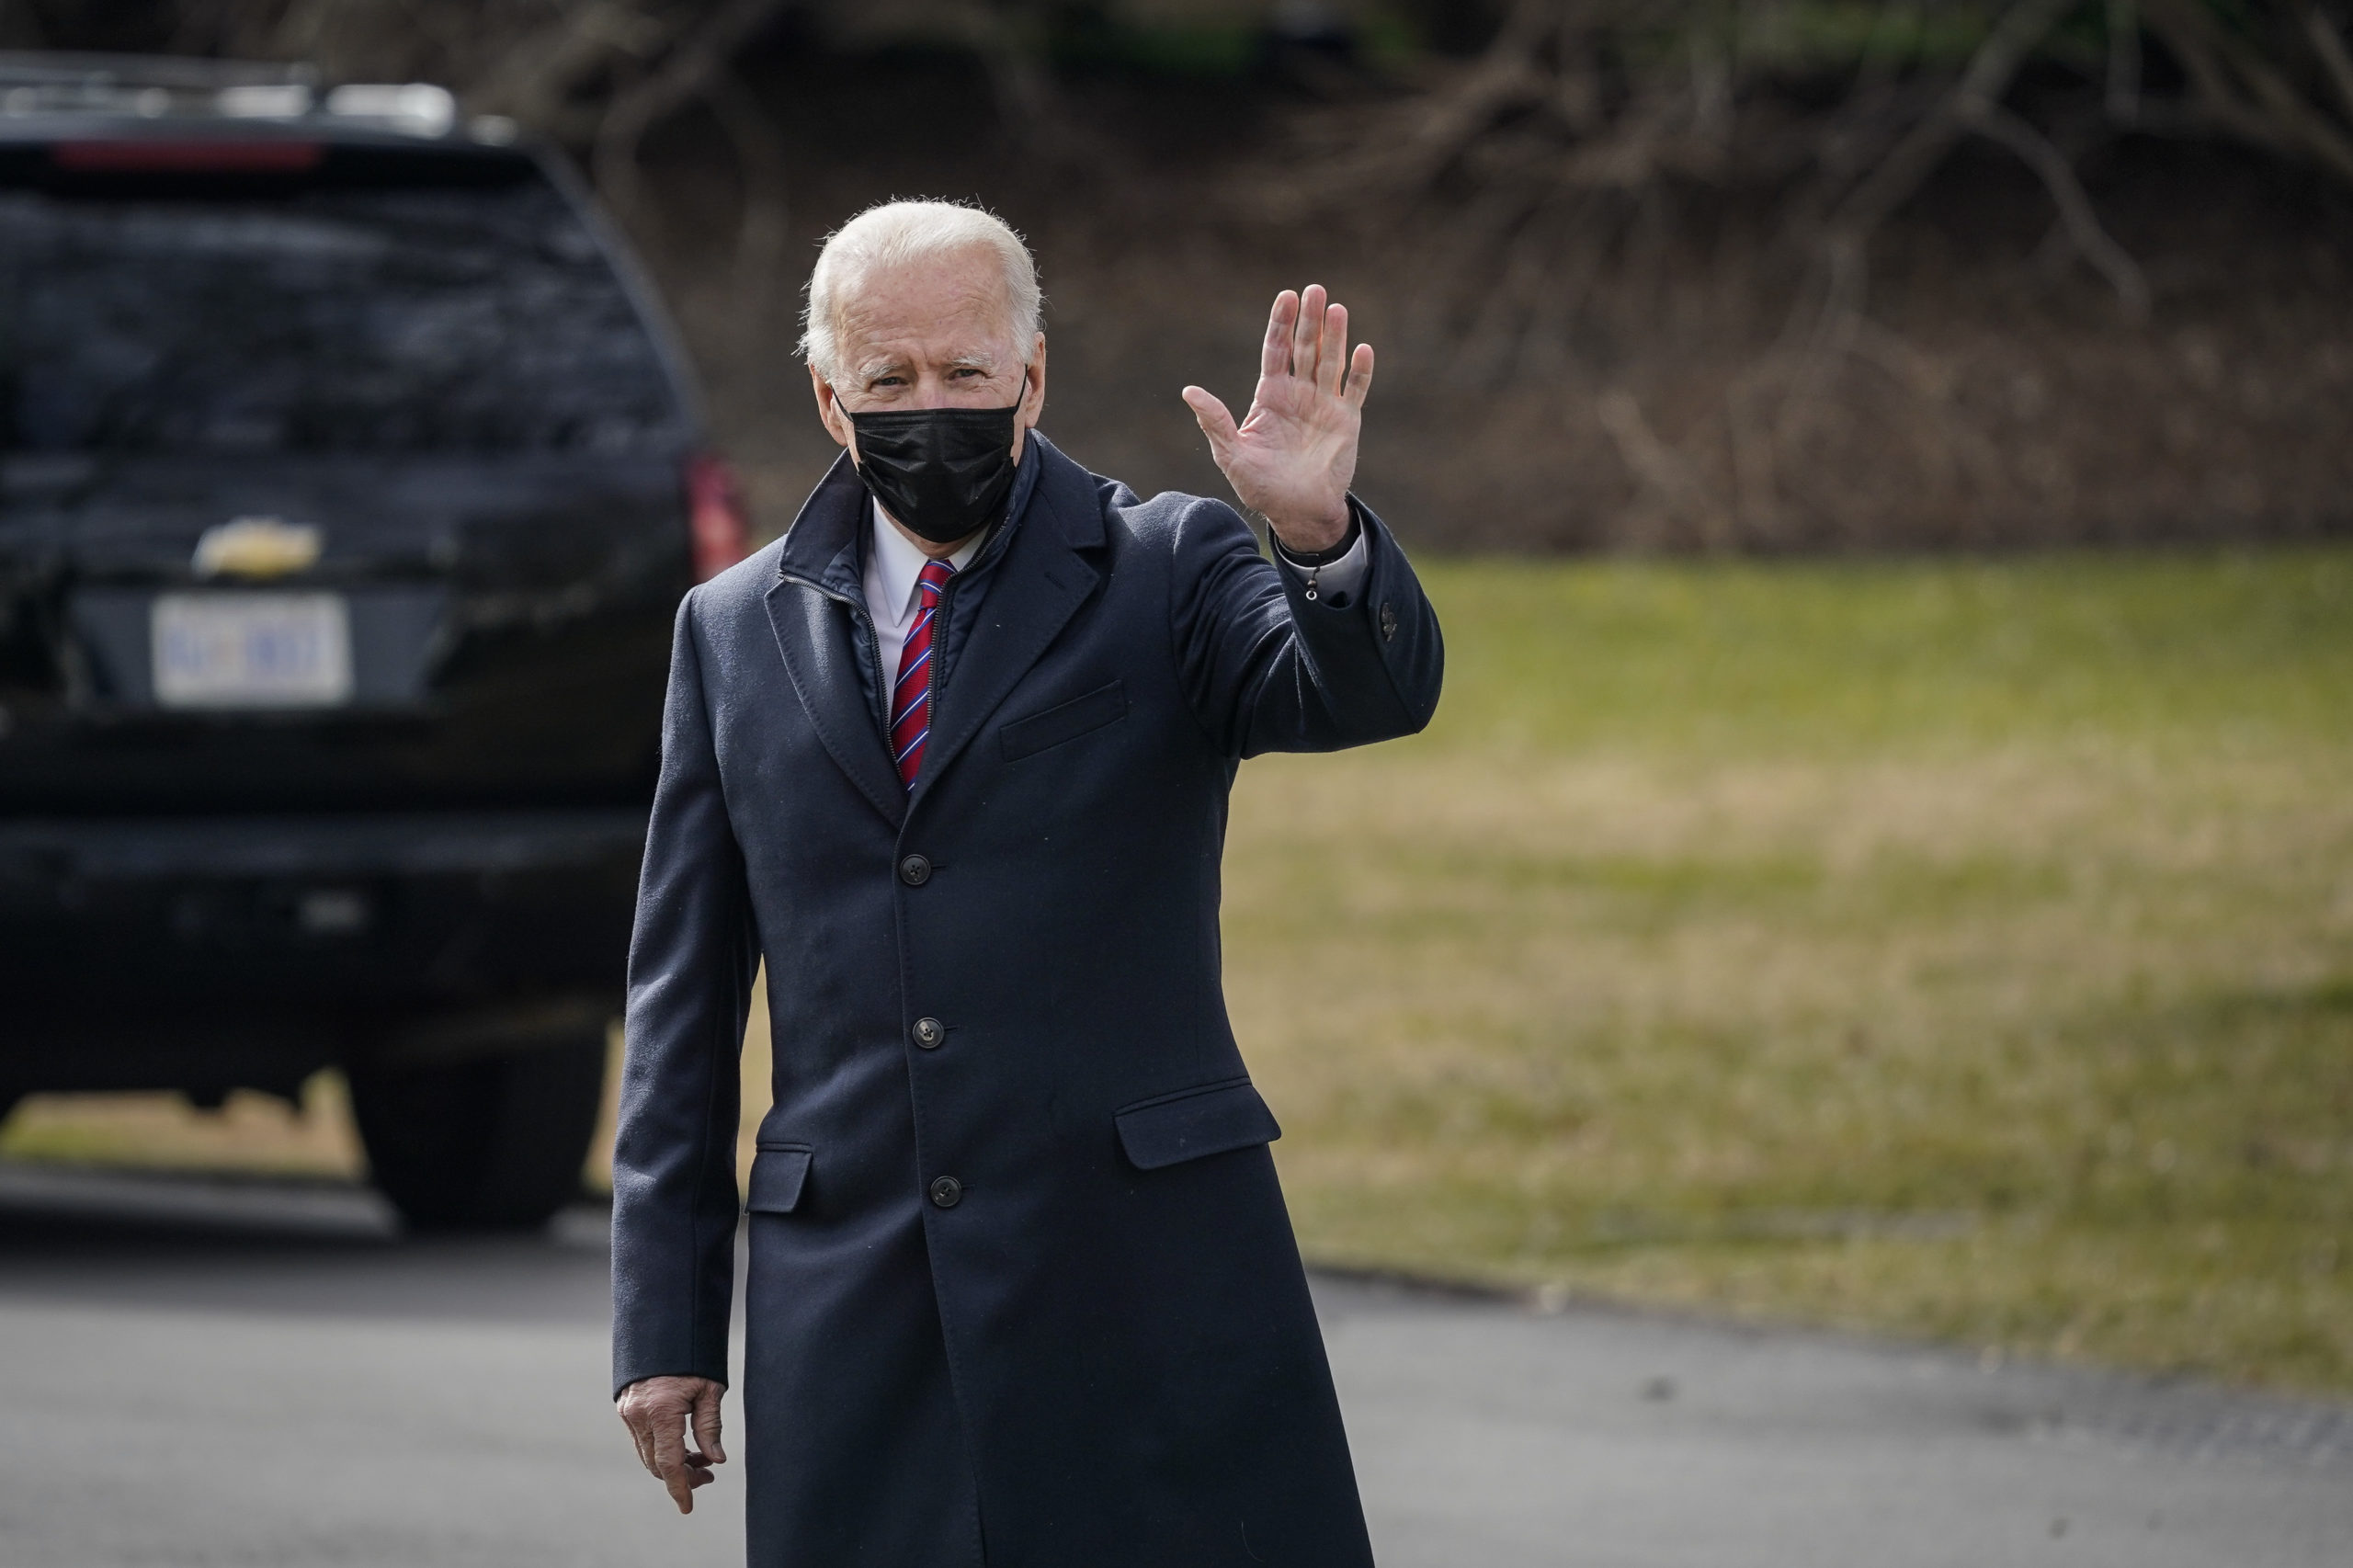 WASHINGTON, DC - JANUARY 29: U.S. President Joe Biden walks to Marine One on the South Lawn of the White House on January 29, 2021 in Washington, DC. President Biden is traveling to Walter Reed National Military Medical Center to visit with wounded service members. (Photo by Drew Angerer/Getty Images)